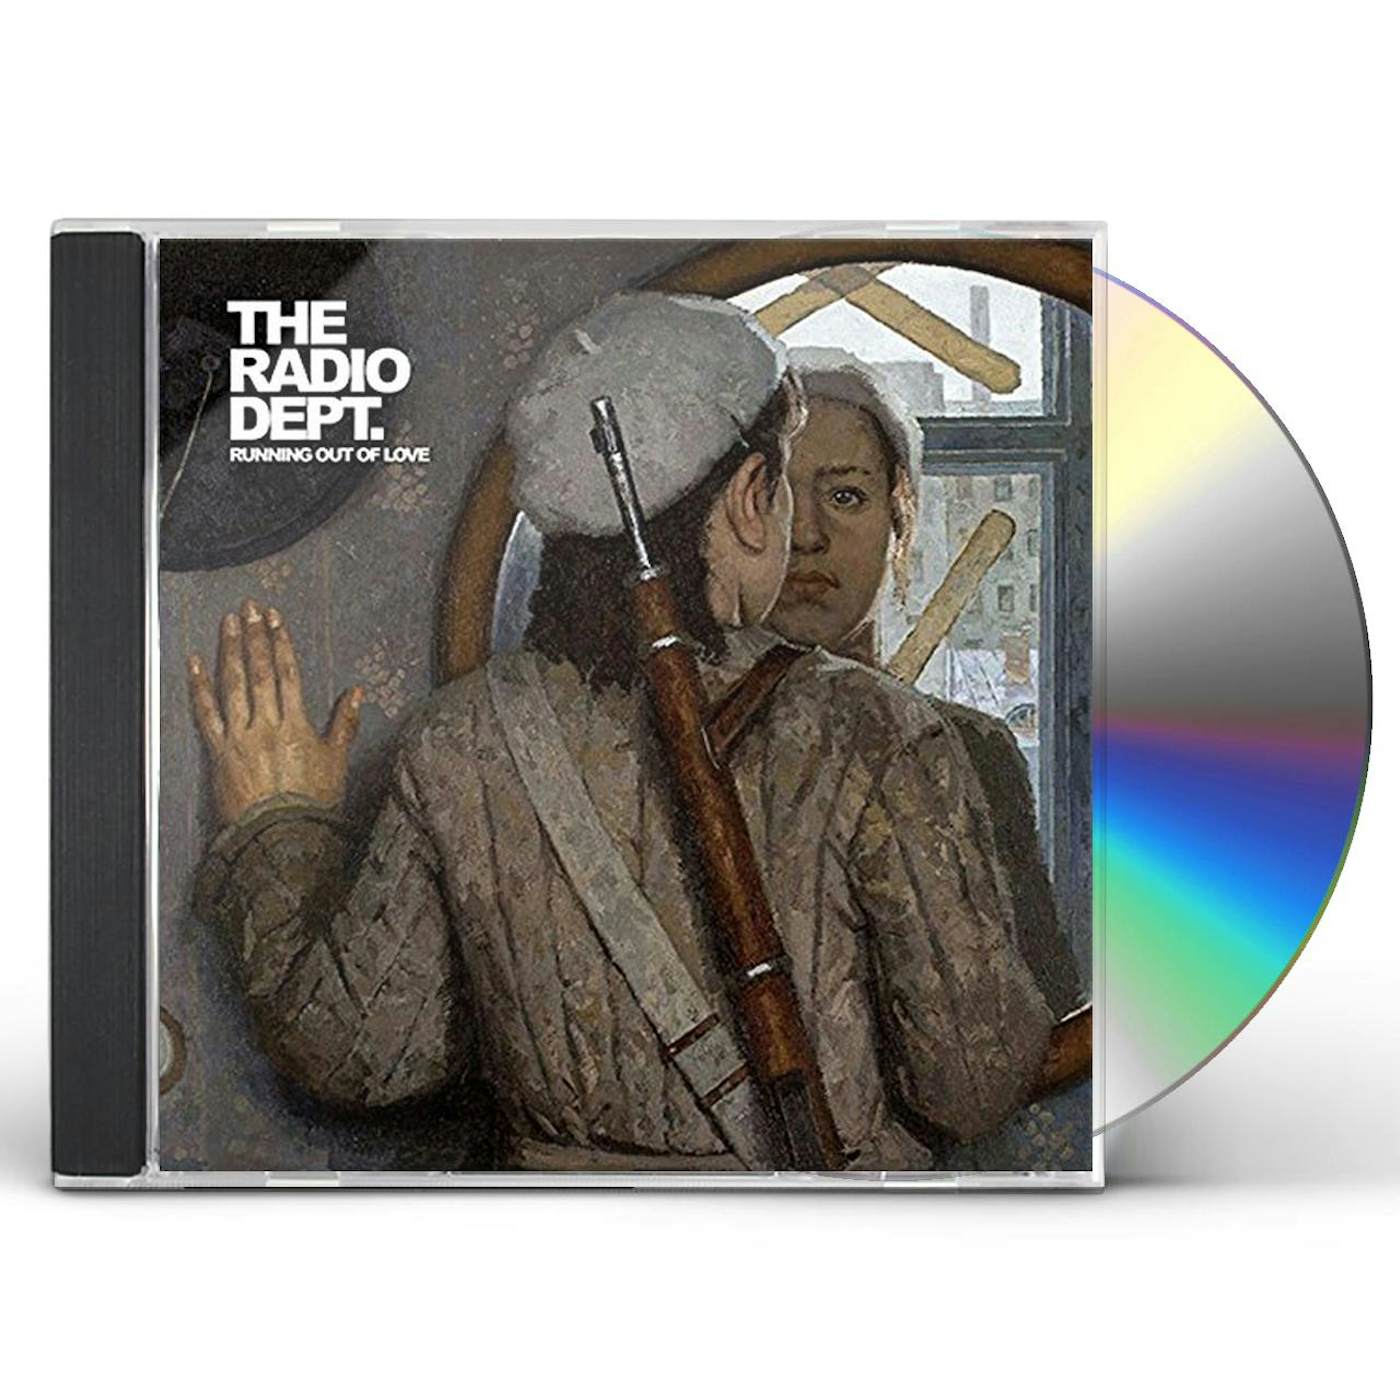 The Radio Dept. RUNNING OUT OF LOVE CD